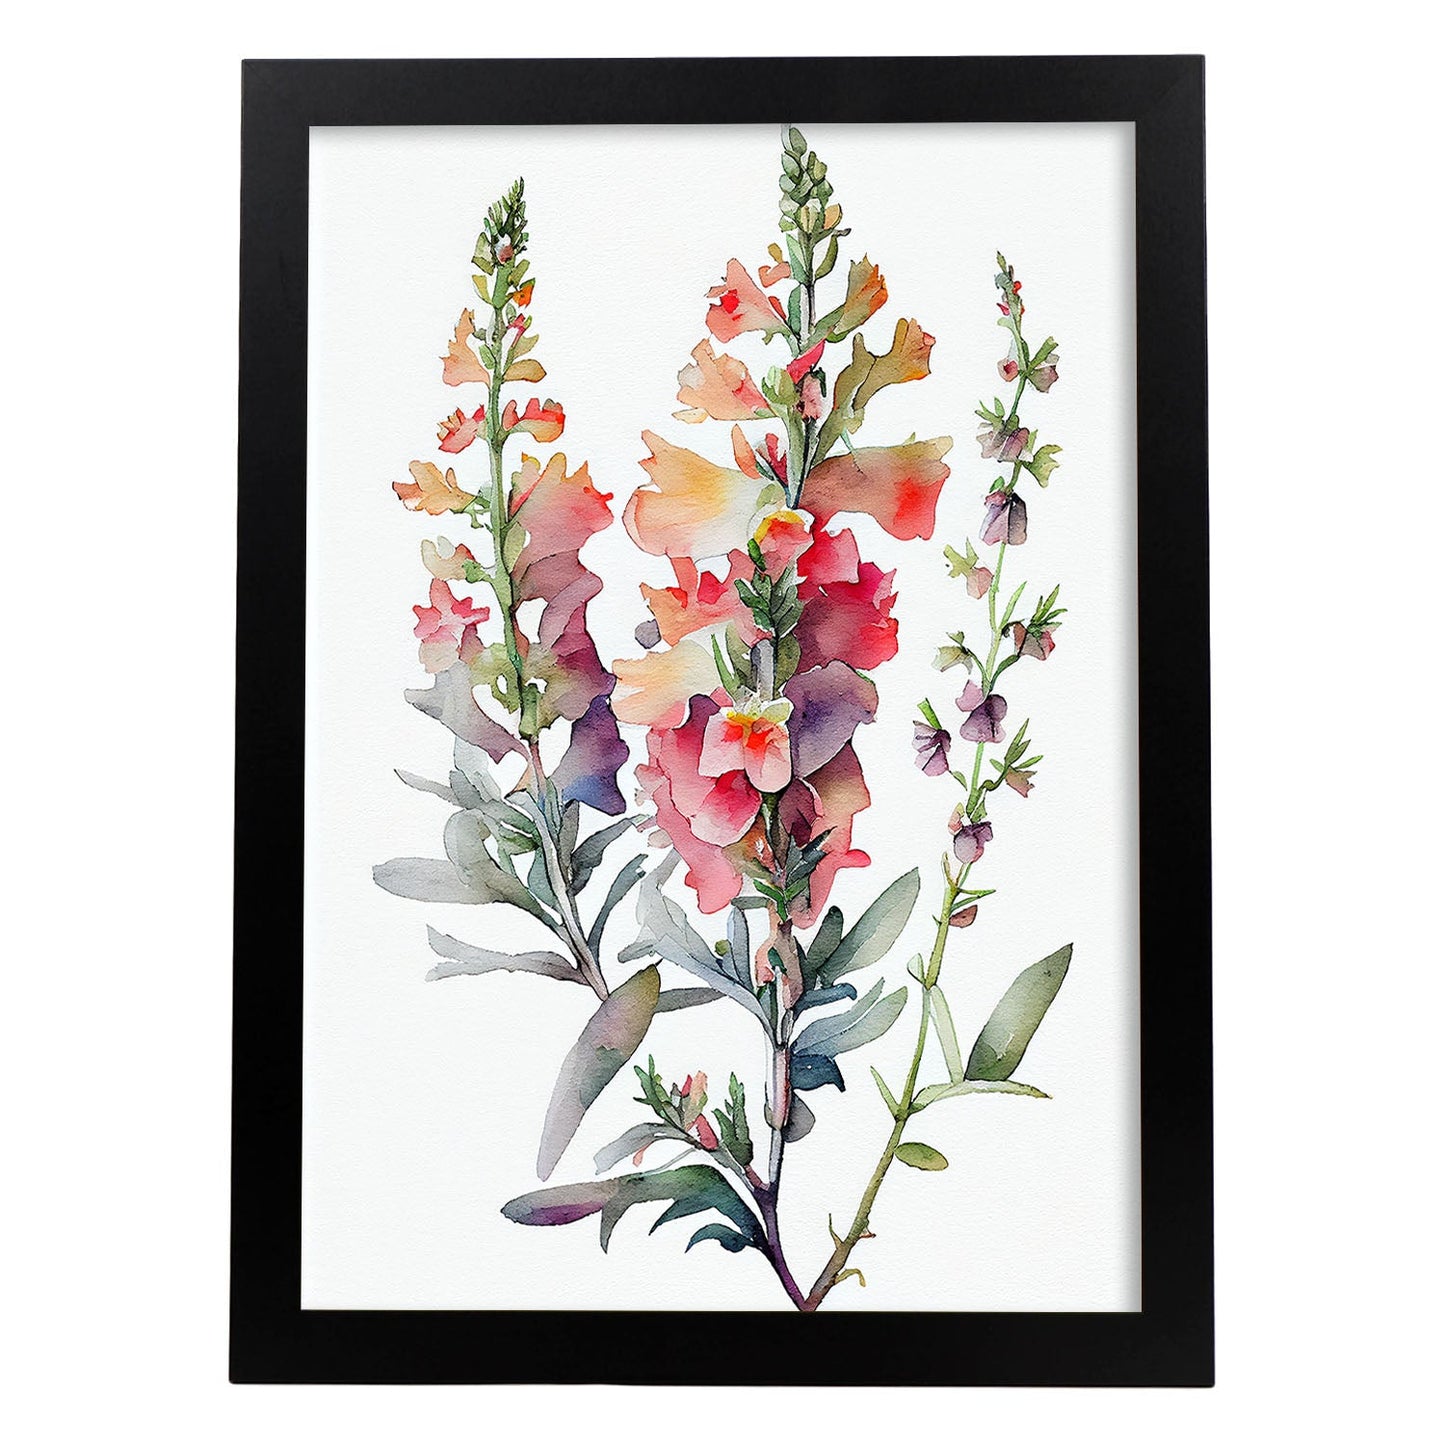 Nacnic watercolor minmal Snapdragon_3. Aesthetic Wall Art Prints for Bedroom or Living Room Design.